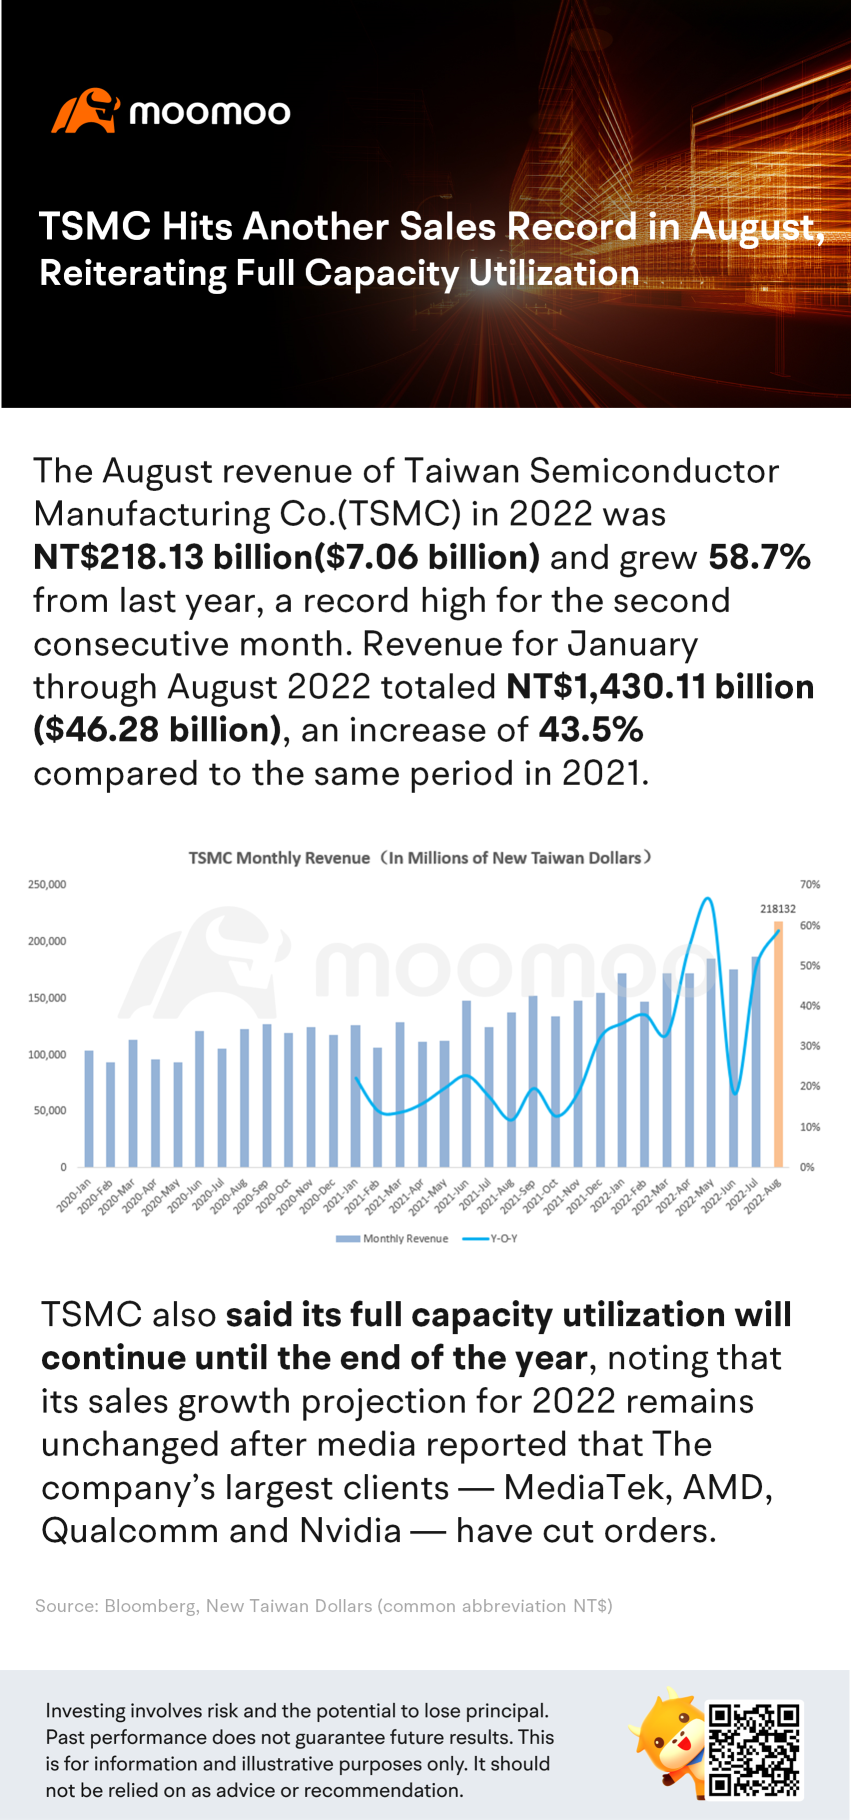 TSMC Hits Another Sales Record in August, Reiterating Full Capacity Utilization